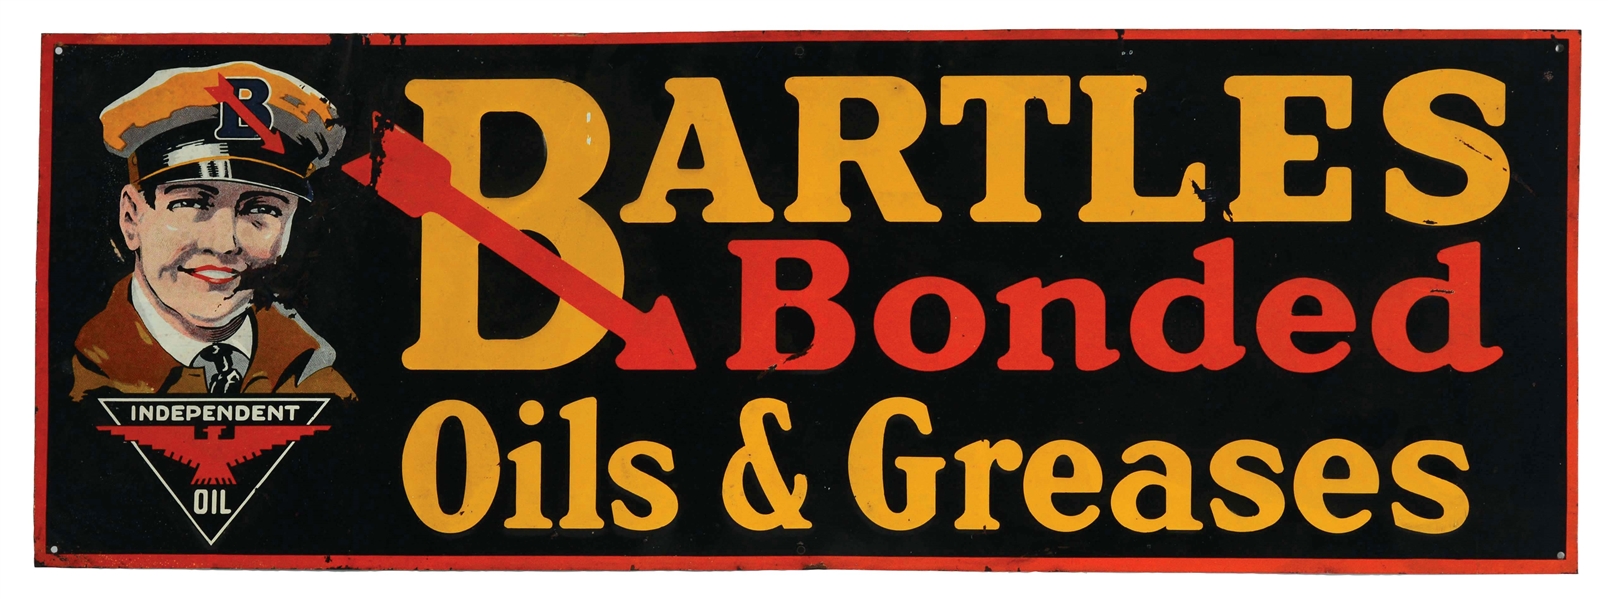 RARE BARTLES BONDED OILS & GREASES EMBOSSED TIN SIGN WITH INDEPENDENT GRAPHIC.